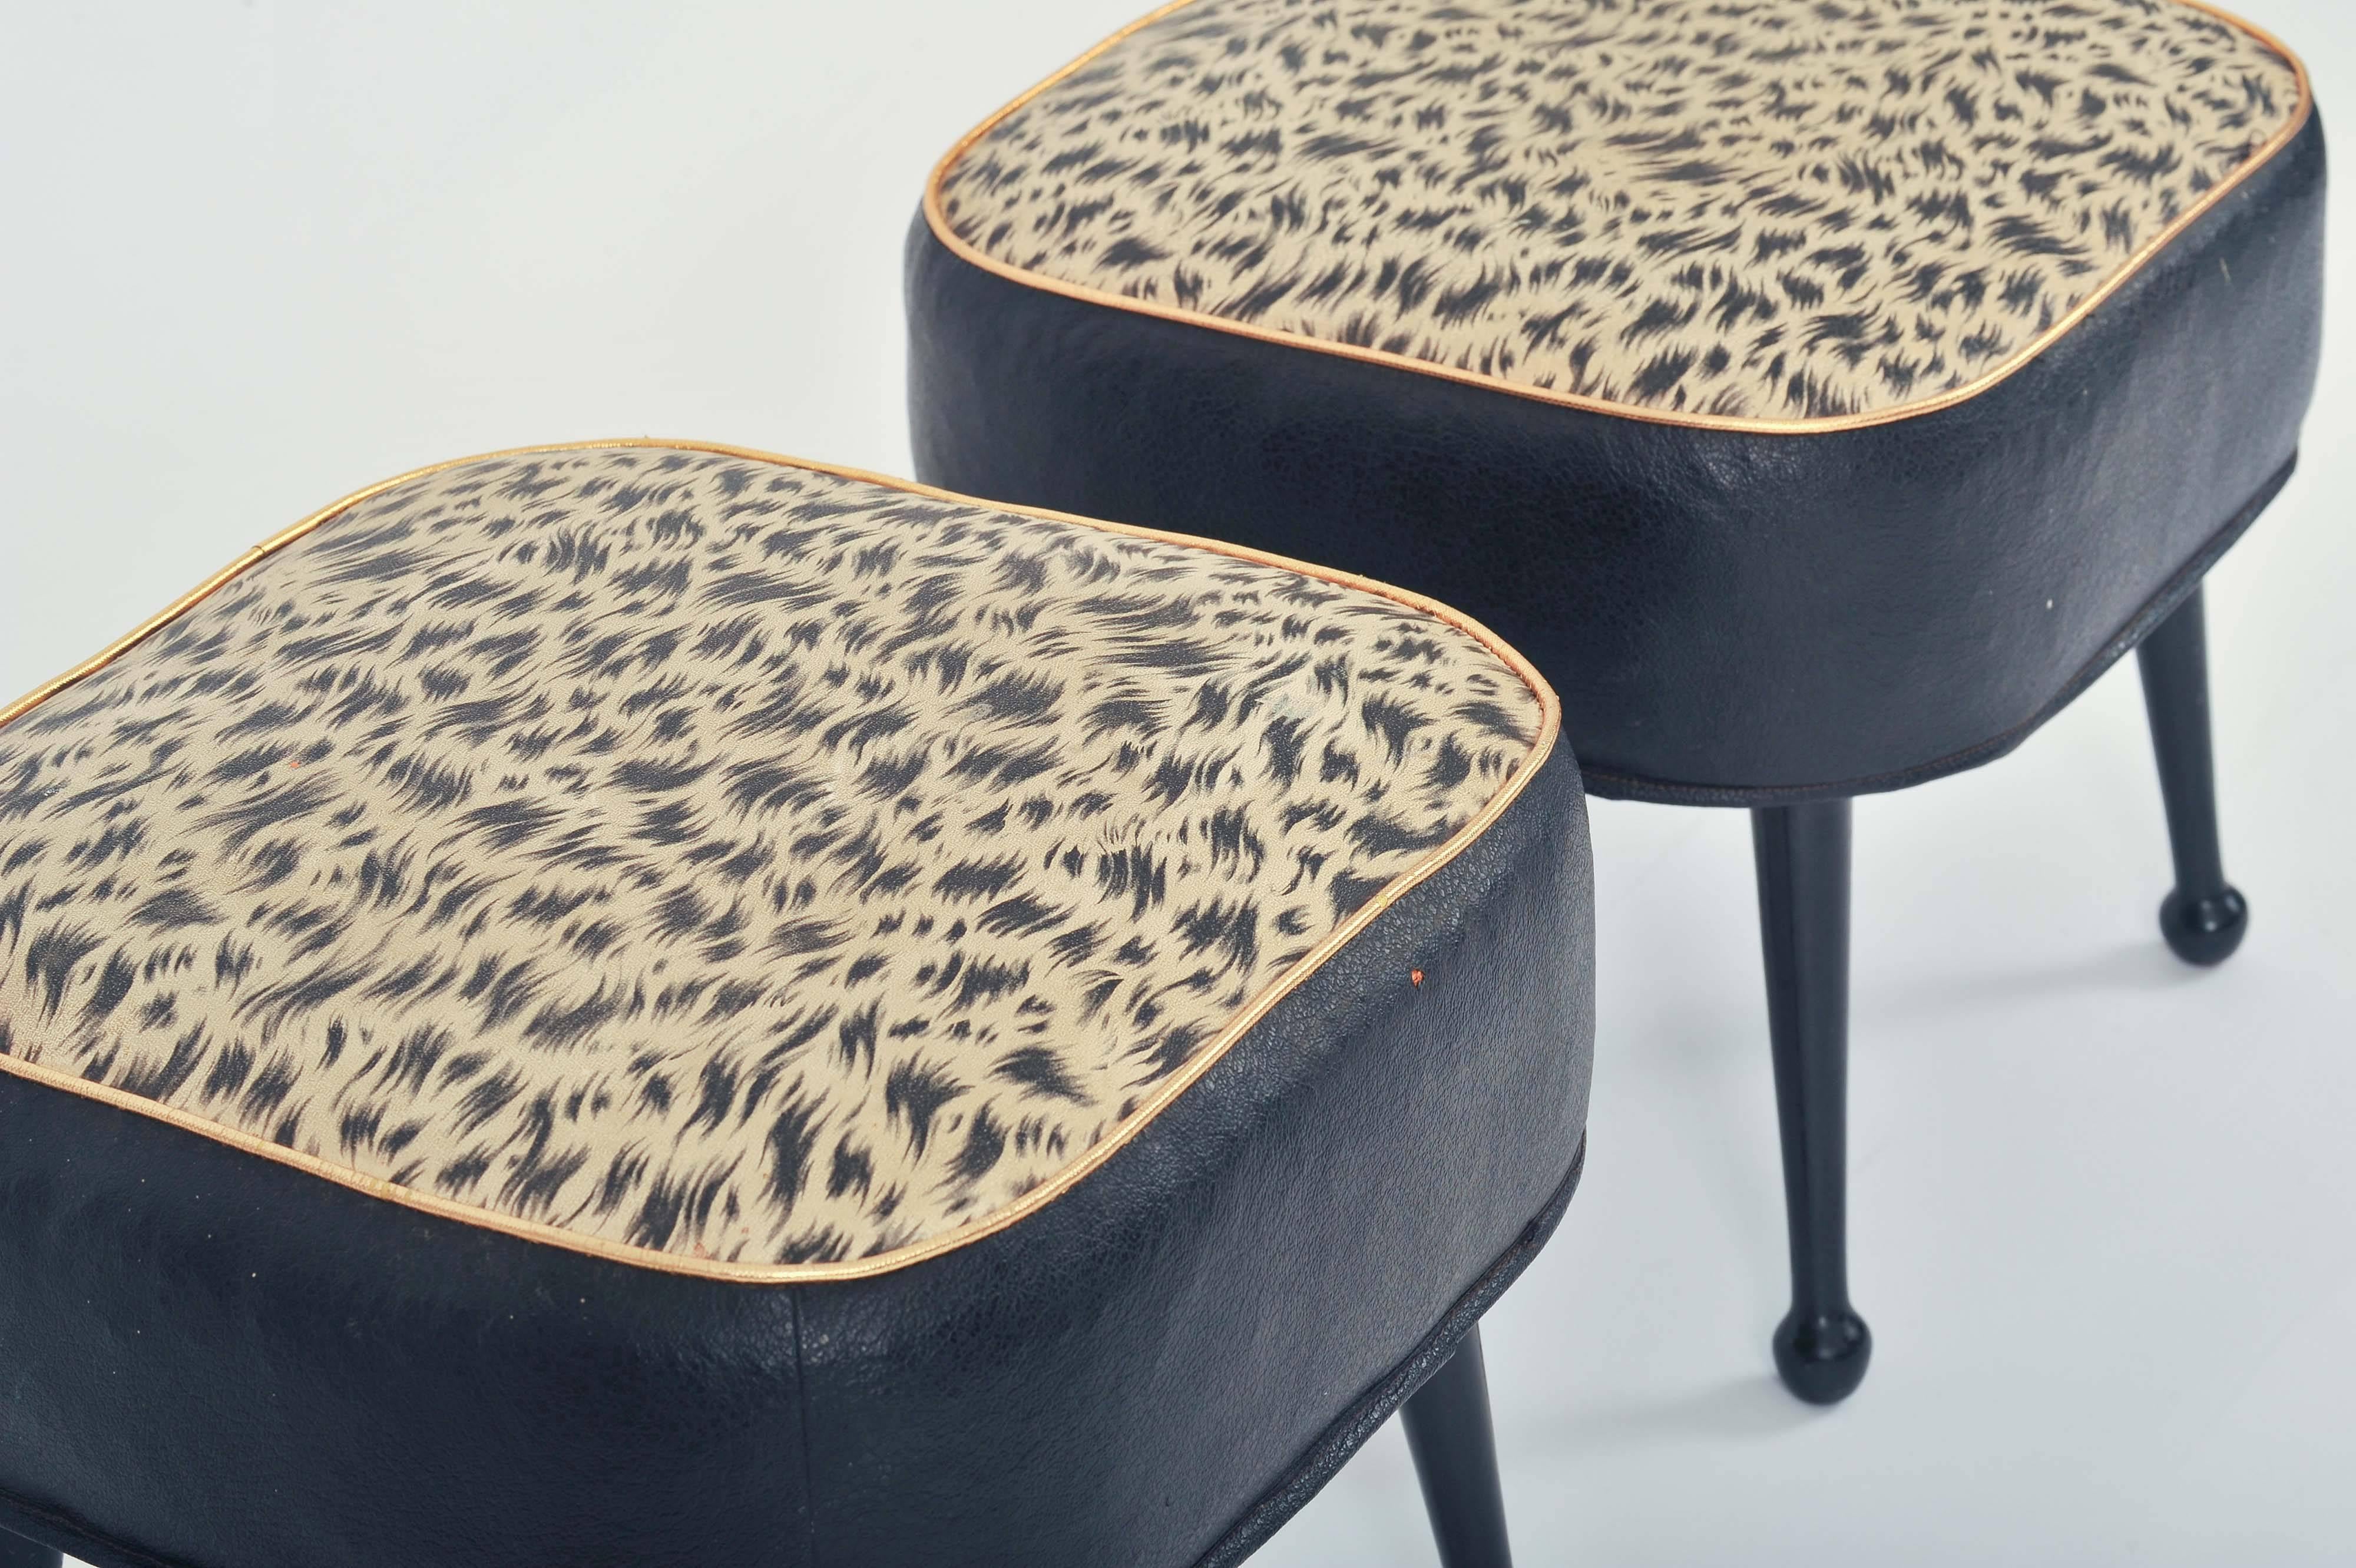 Pair of 1950s Footstools with Original Vinyl Covering 1